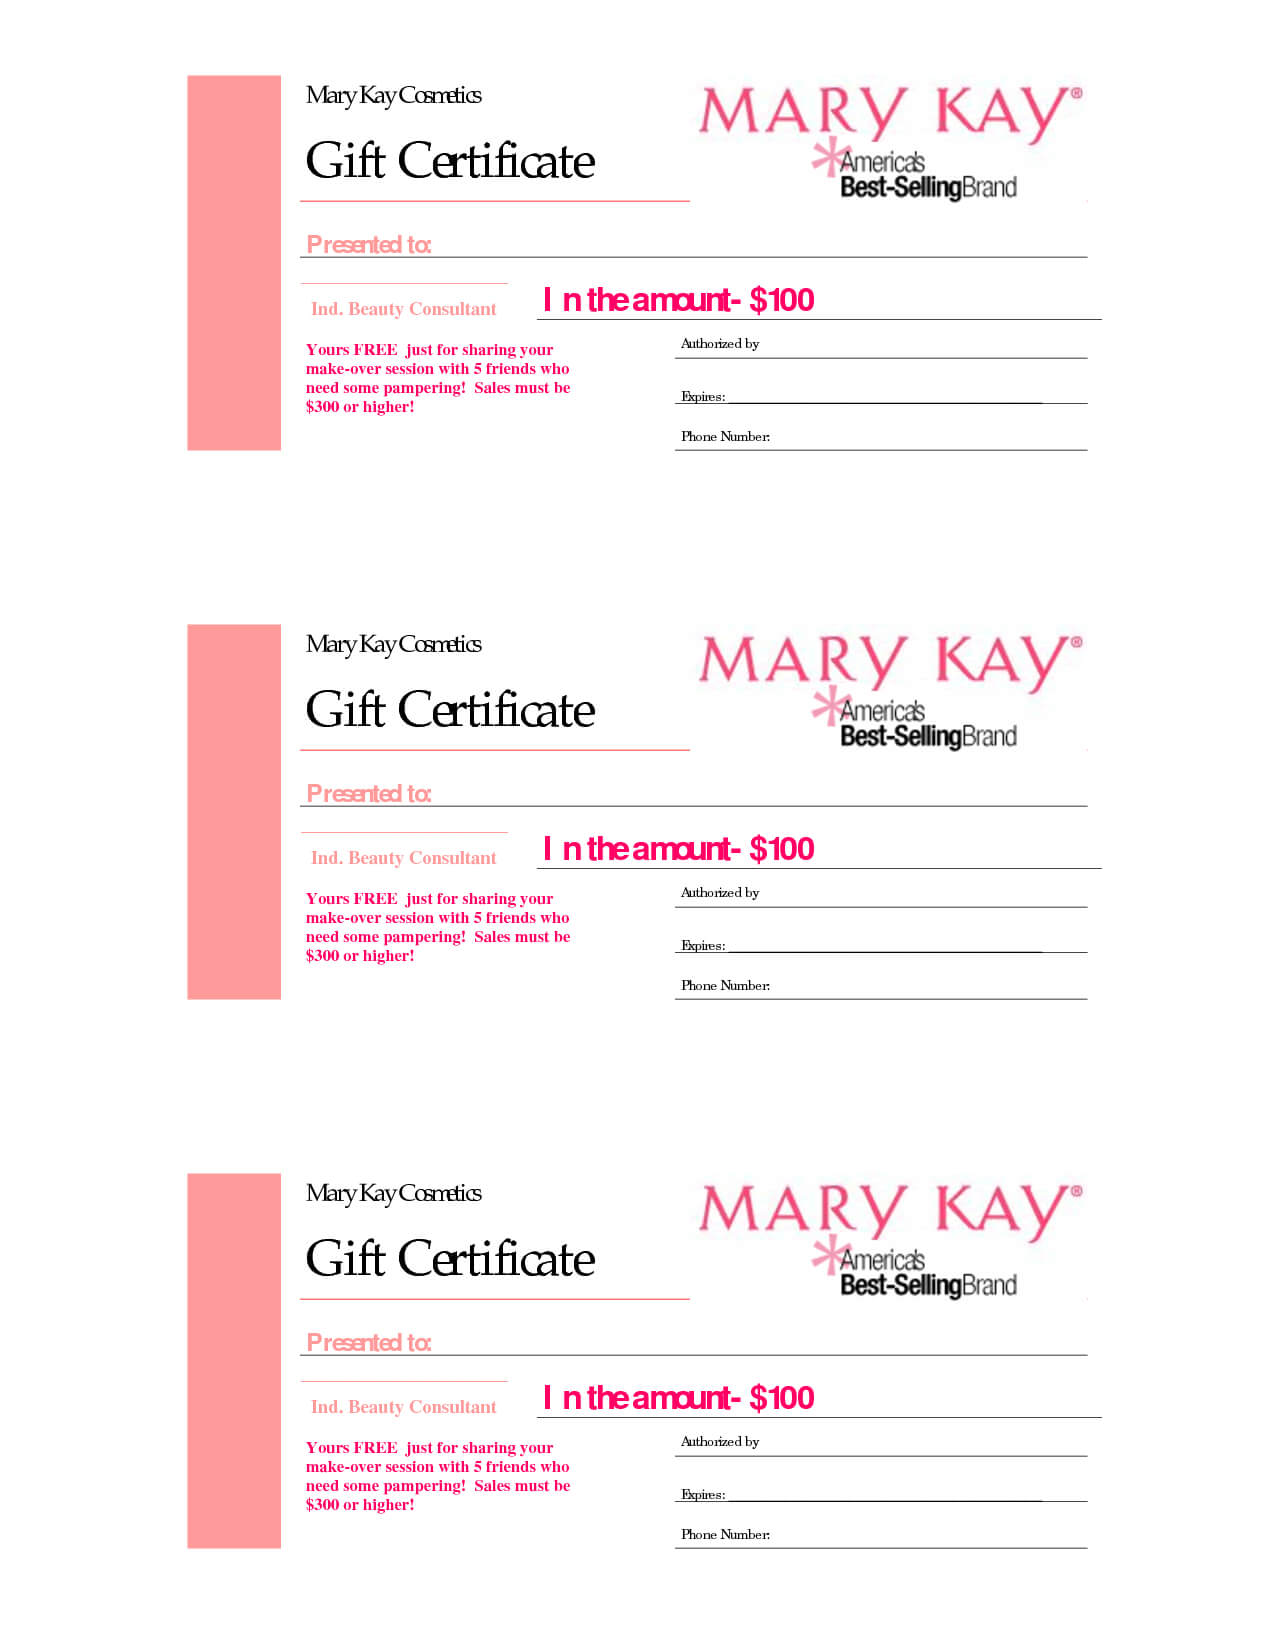 Gift Certificates | Mary Kay Gift Certificate! Checo That Throughout Referral Certificate Template